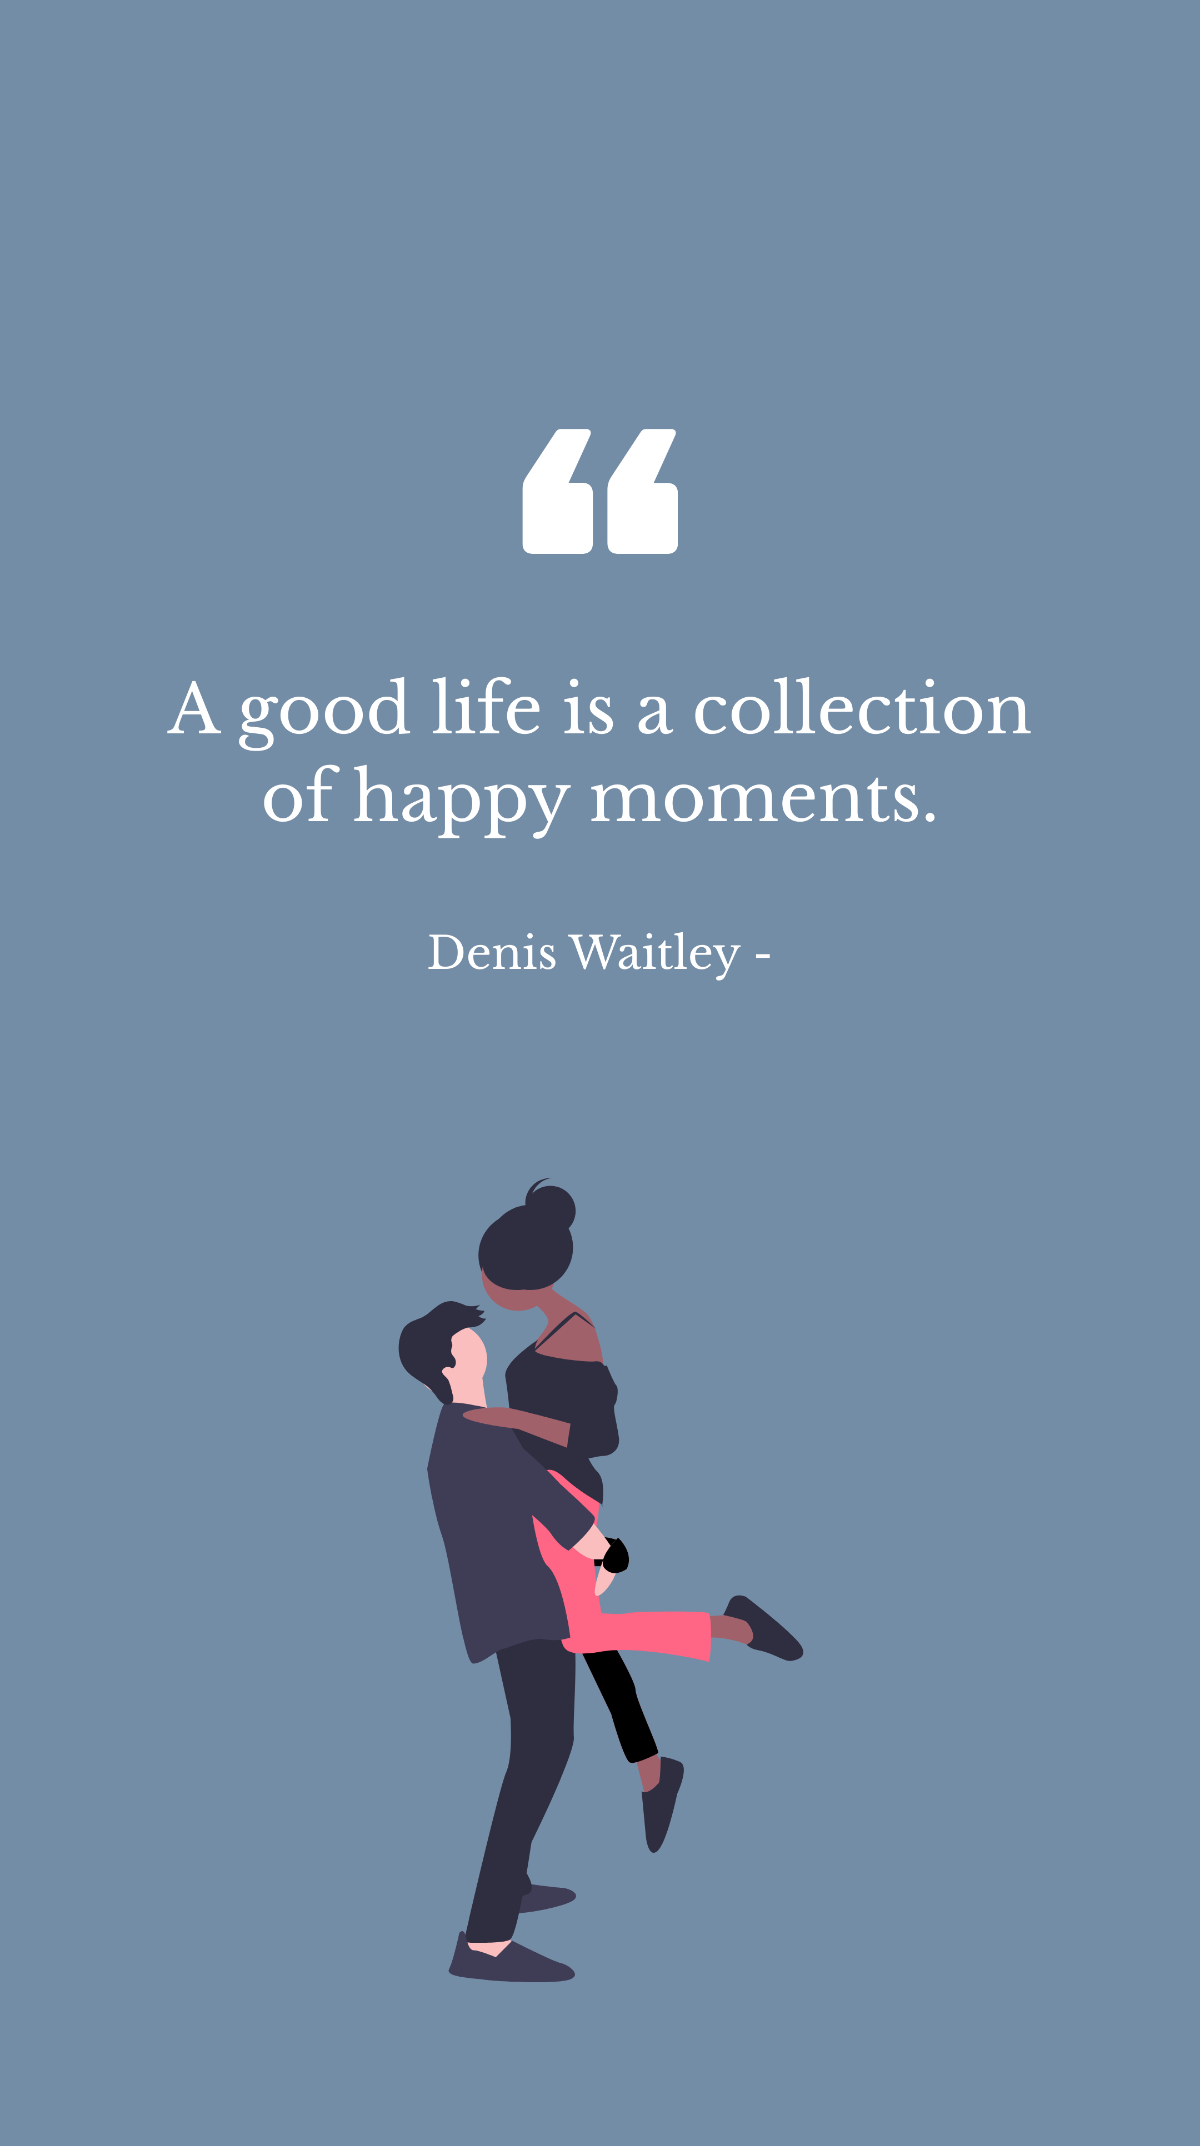 Denis Waitley - A good life is a collection of happy moments. Template